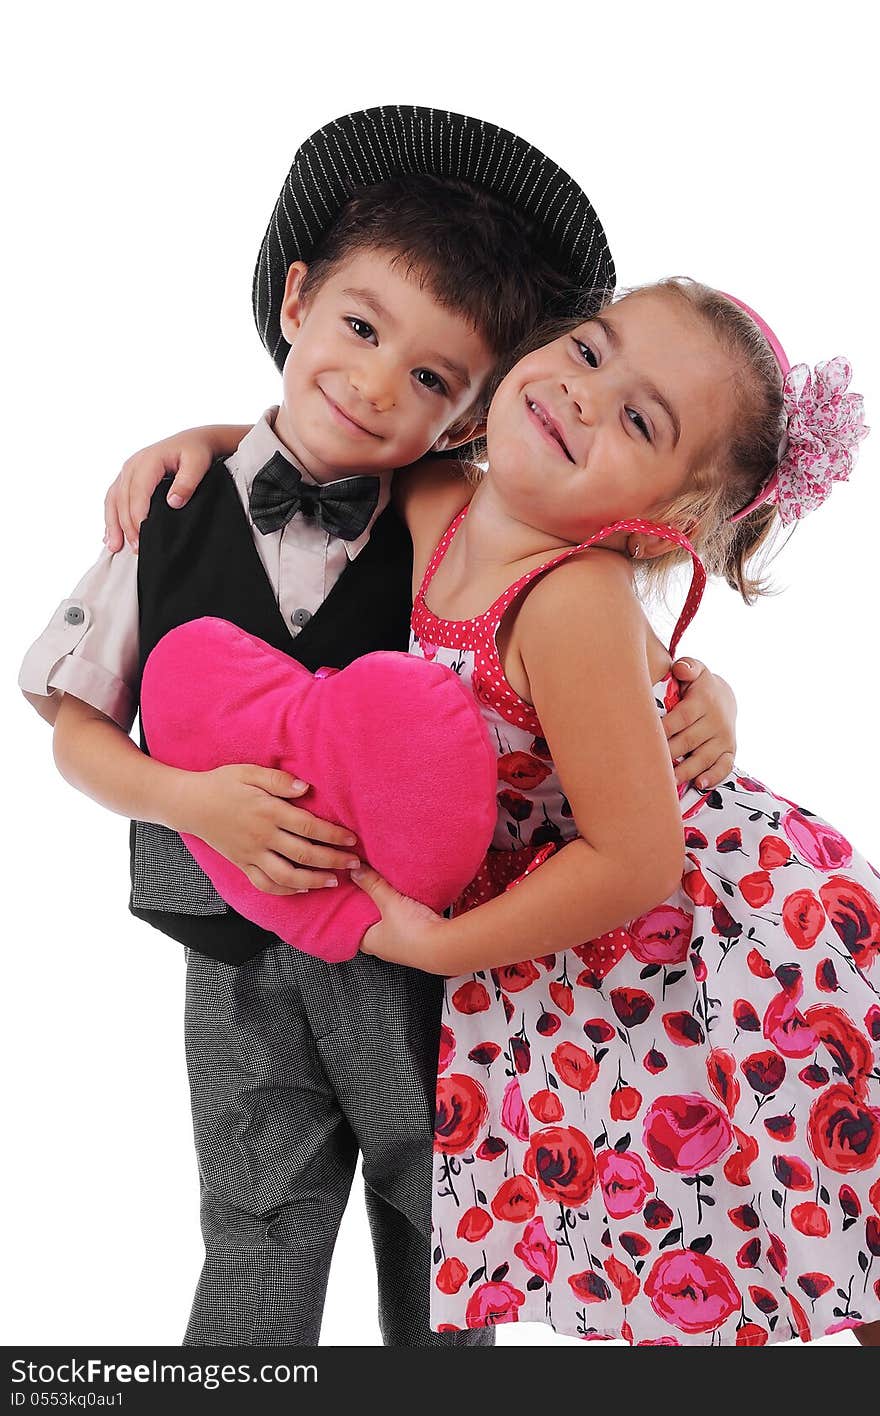 Smiley boy and girl are holding big pink heart beteen them.